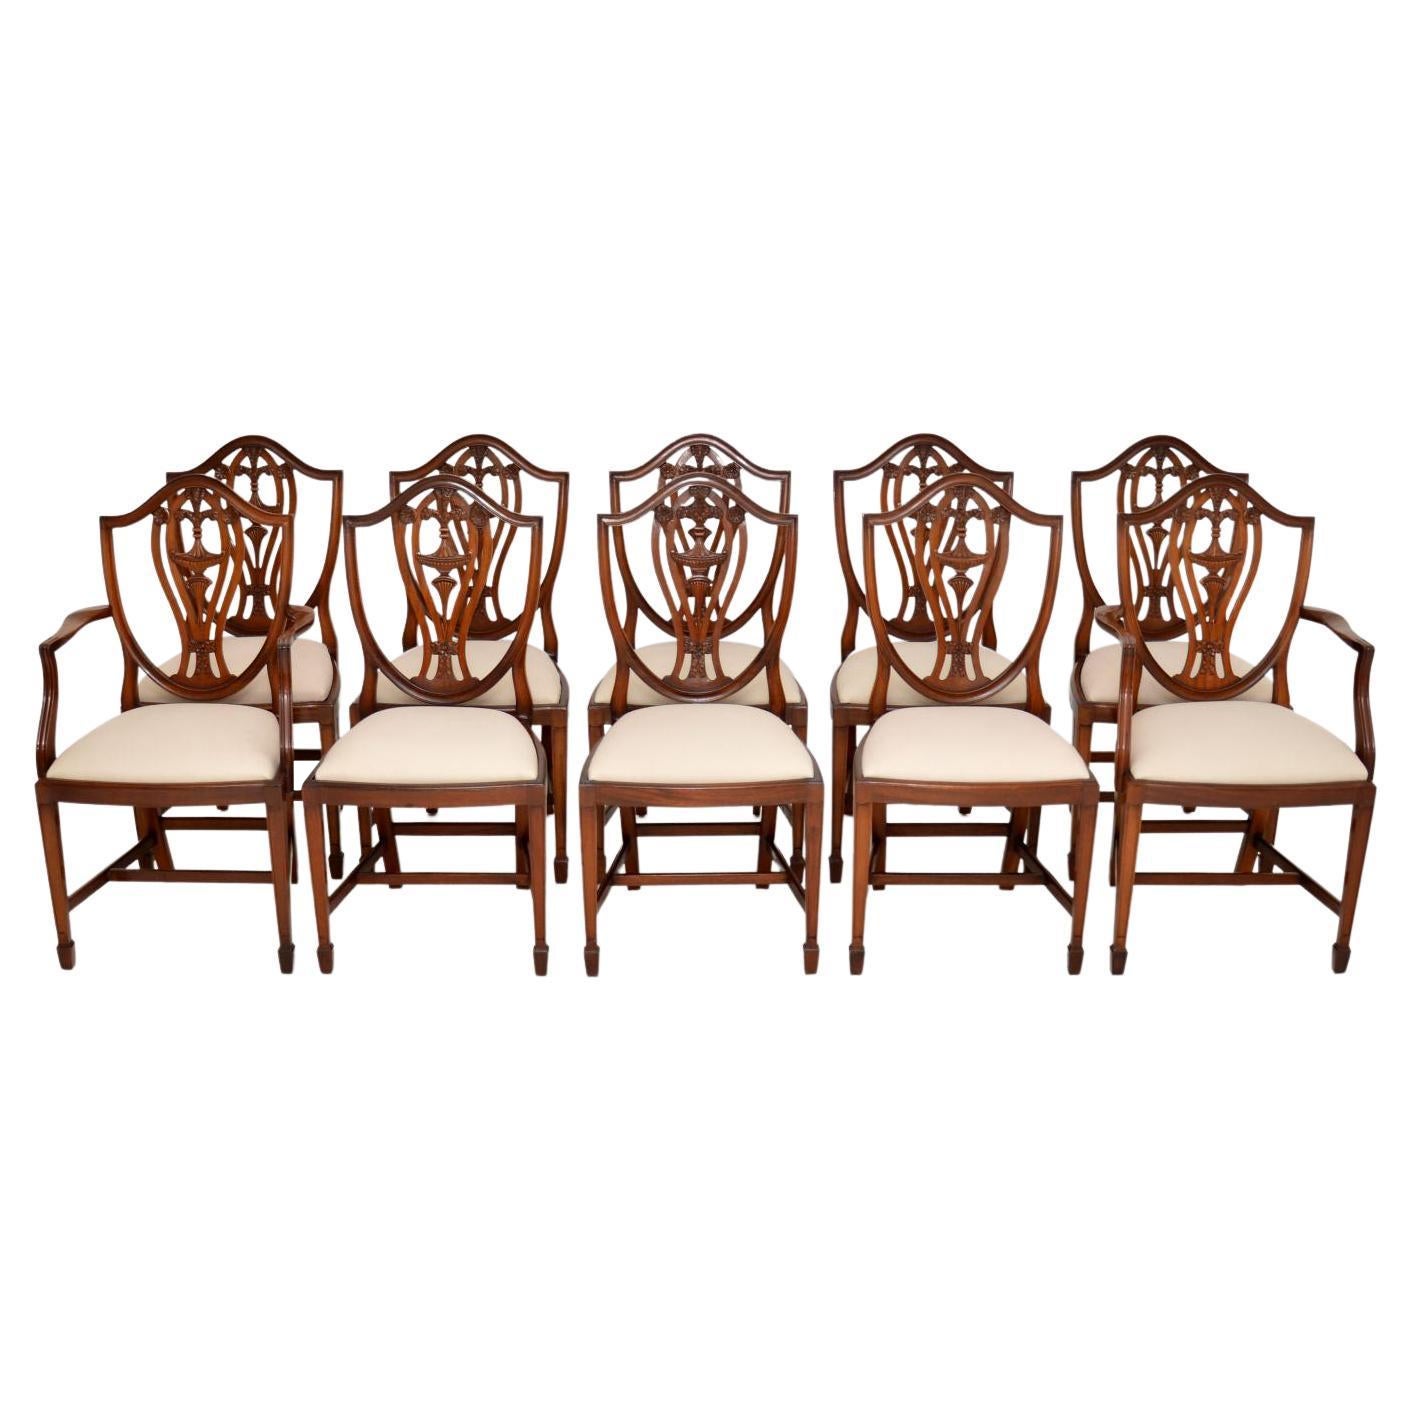 Set of 10 Antique Adam Style Dining Chairs